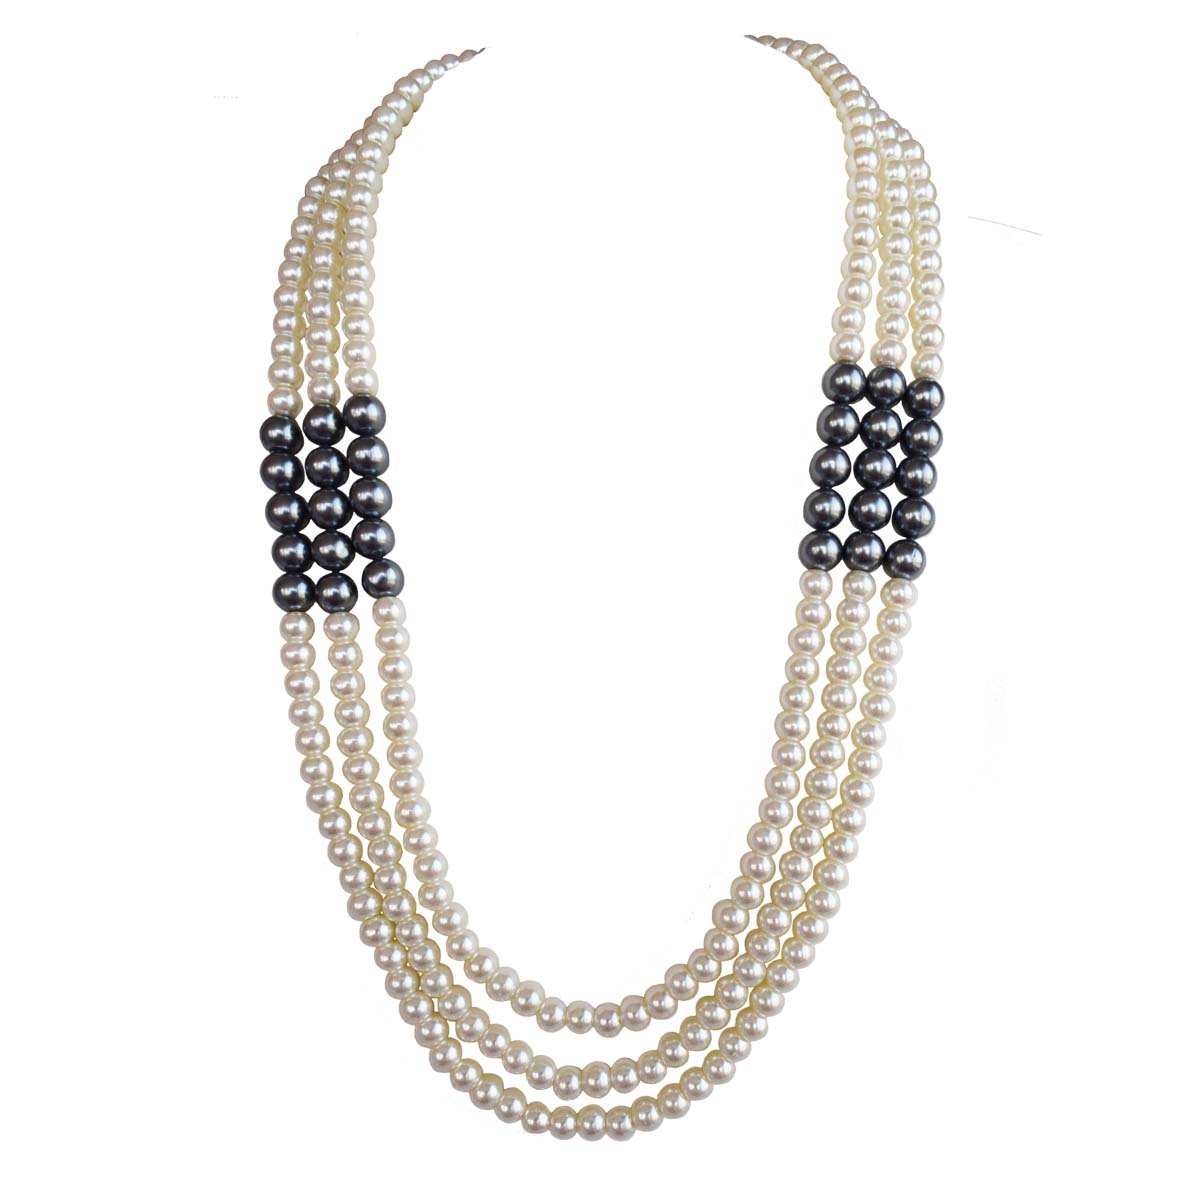 3 Line White & Gray Shell Pearl Necklace for Women (PS576)